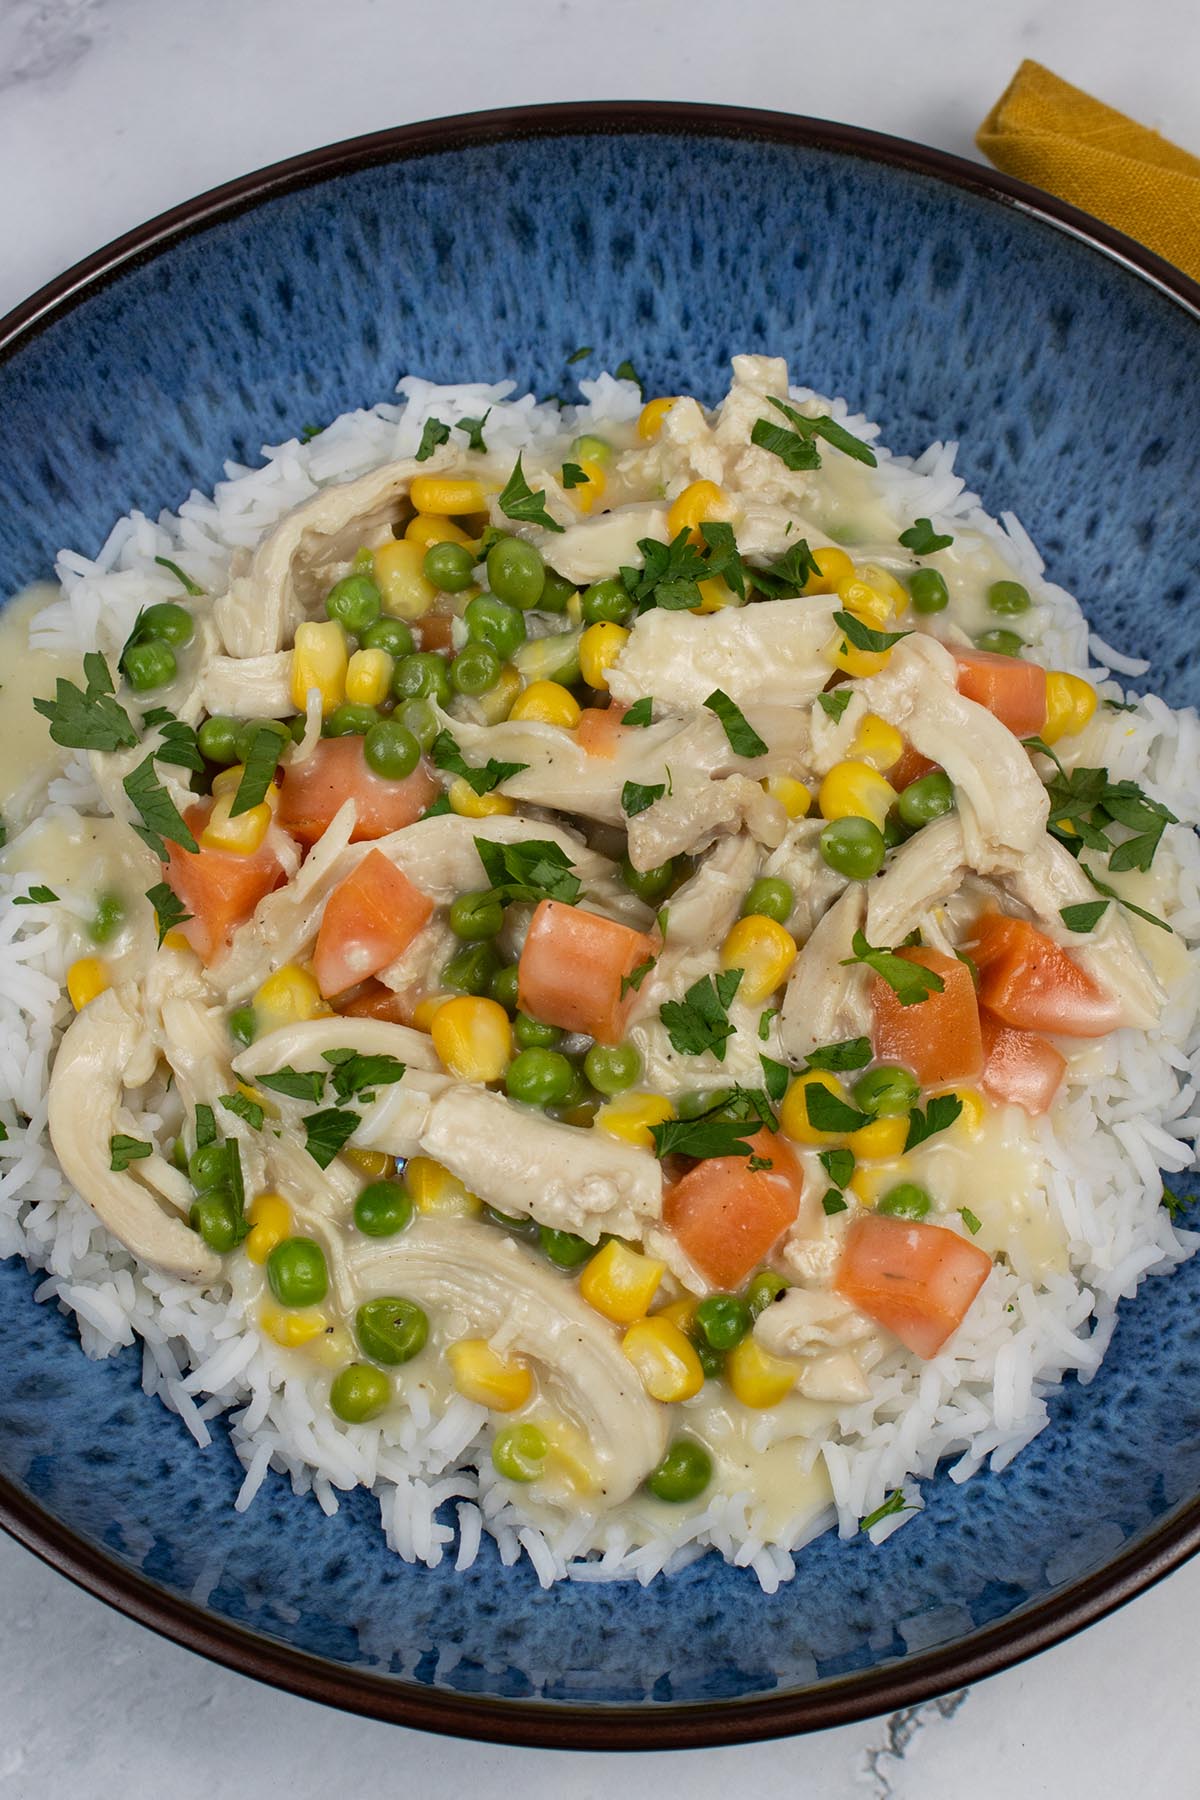 Chicken fricassee with rice in a blue bowl, mustard napkin on the side